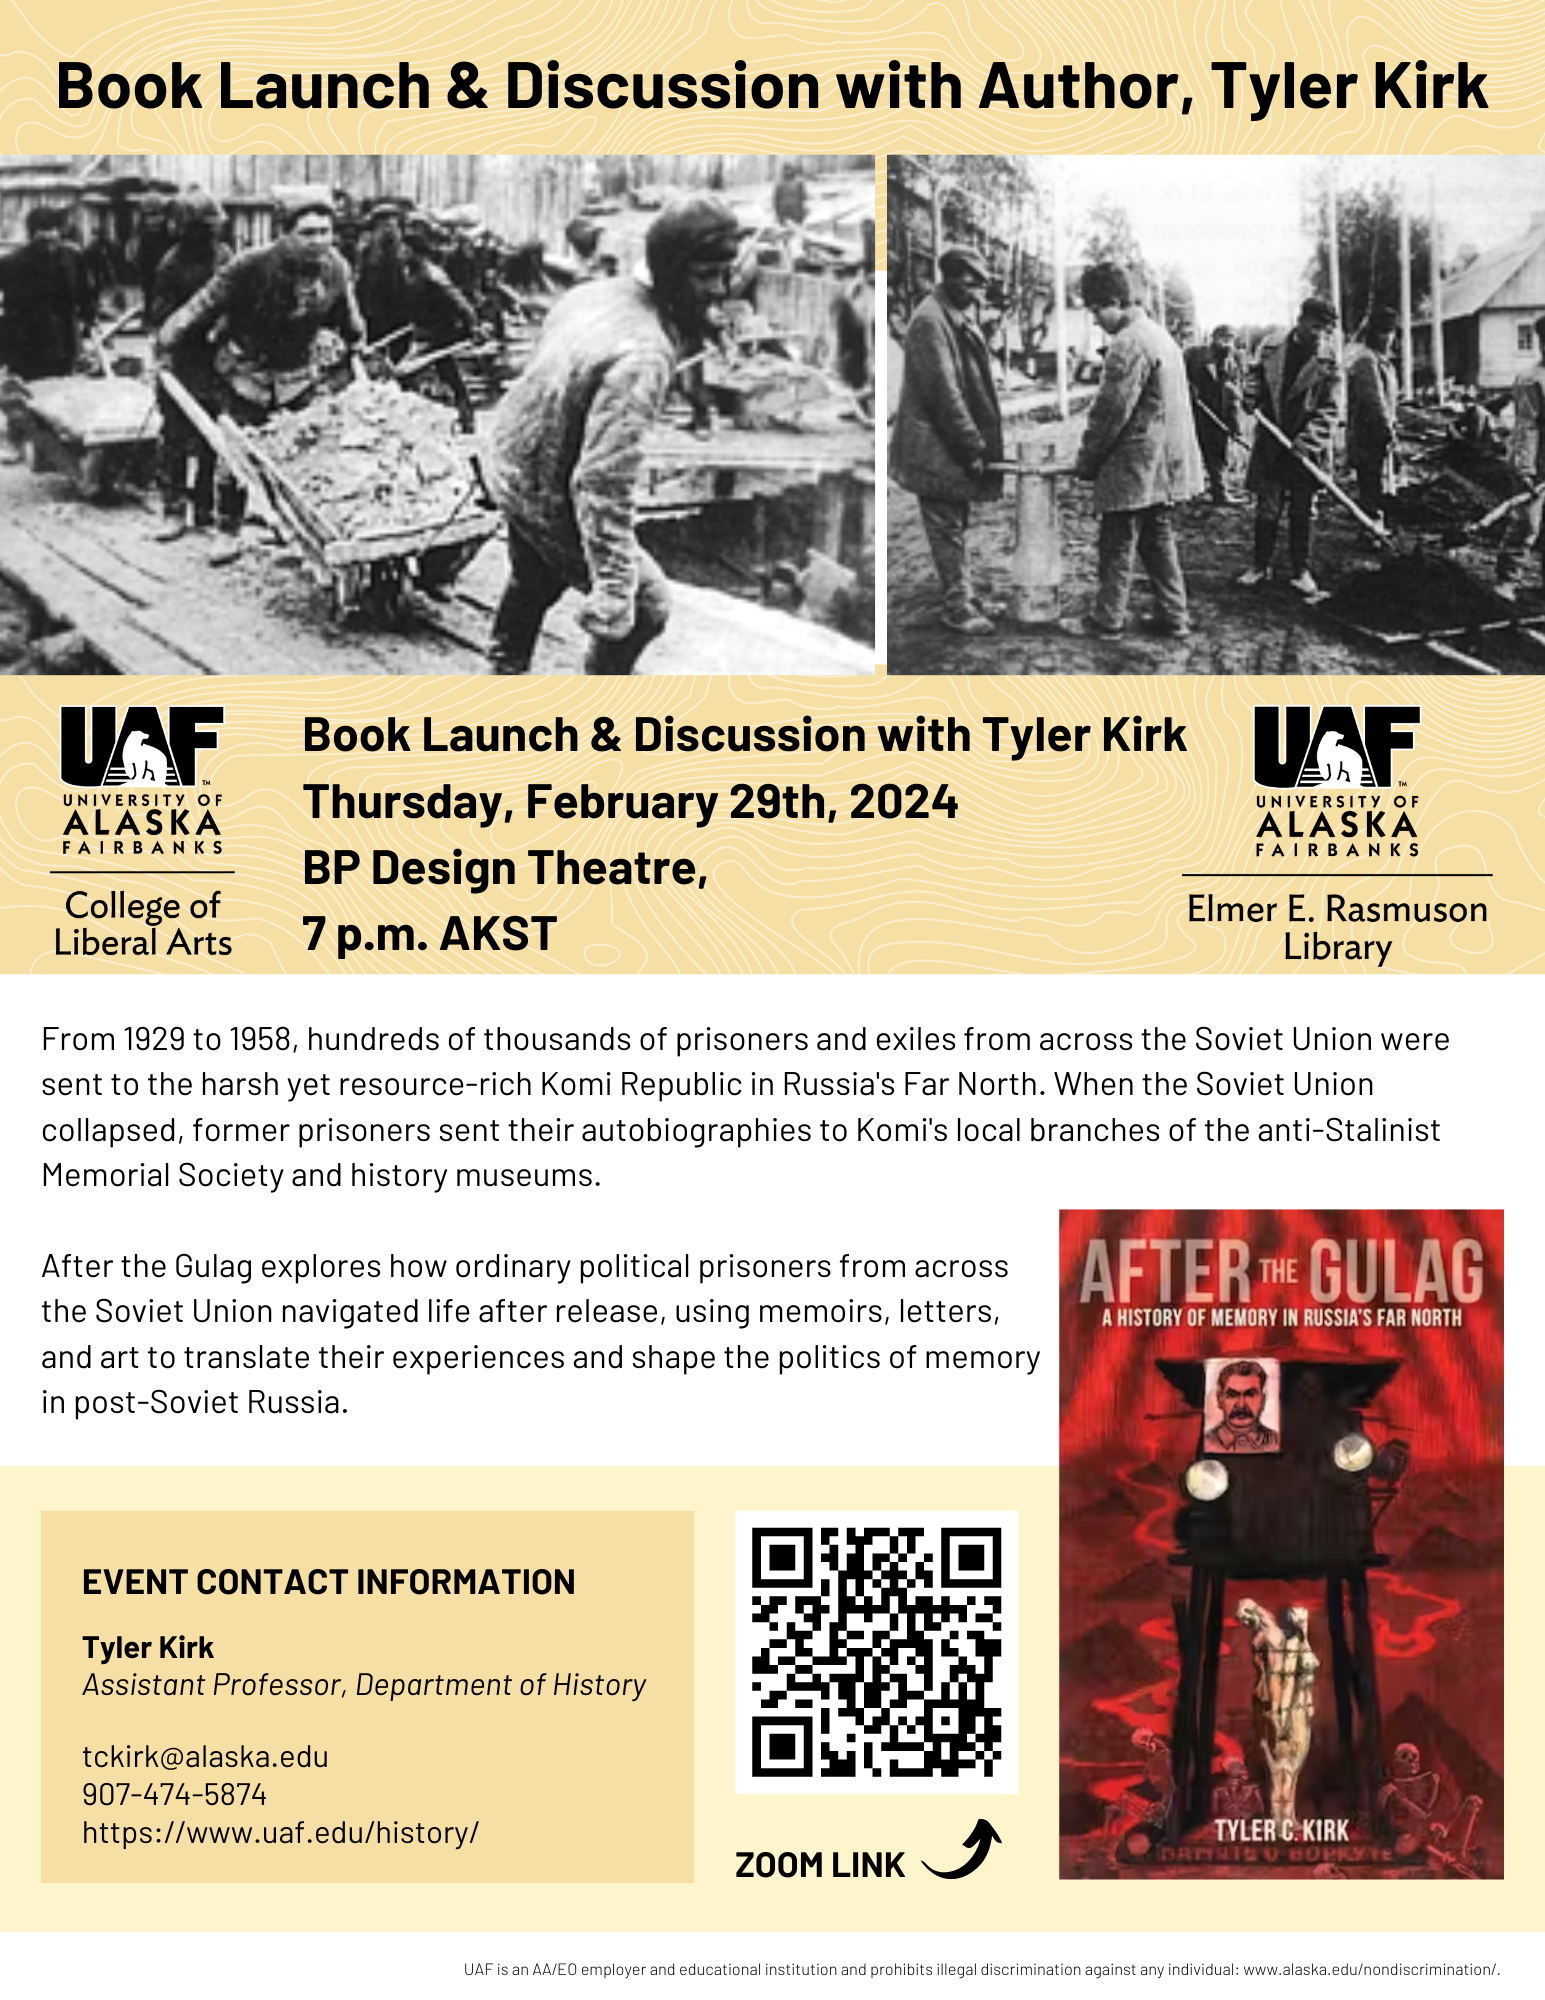 Poster advertising Tyler Kirk's book launch for After the Gulag. UAF image.